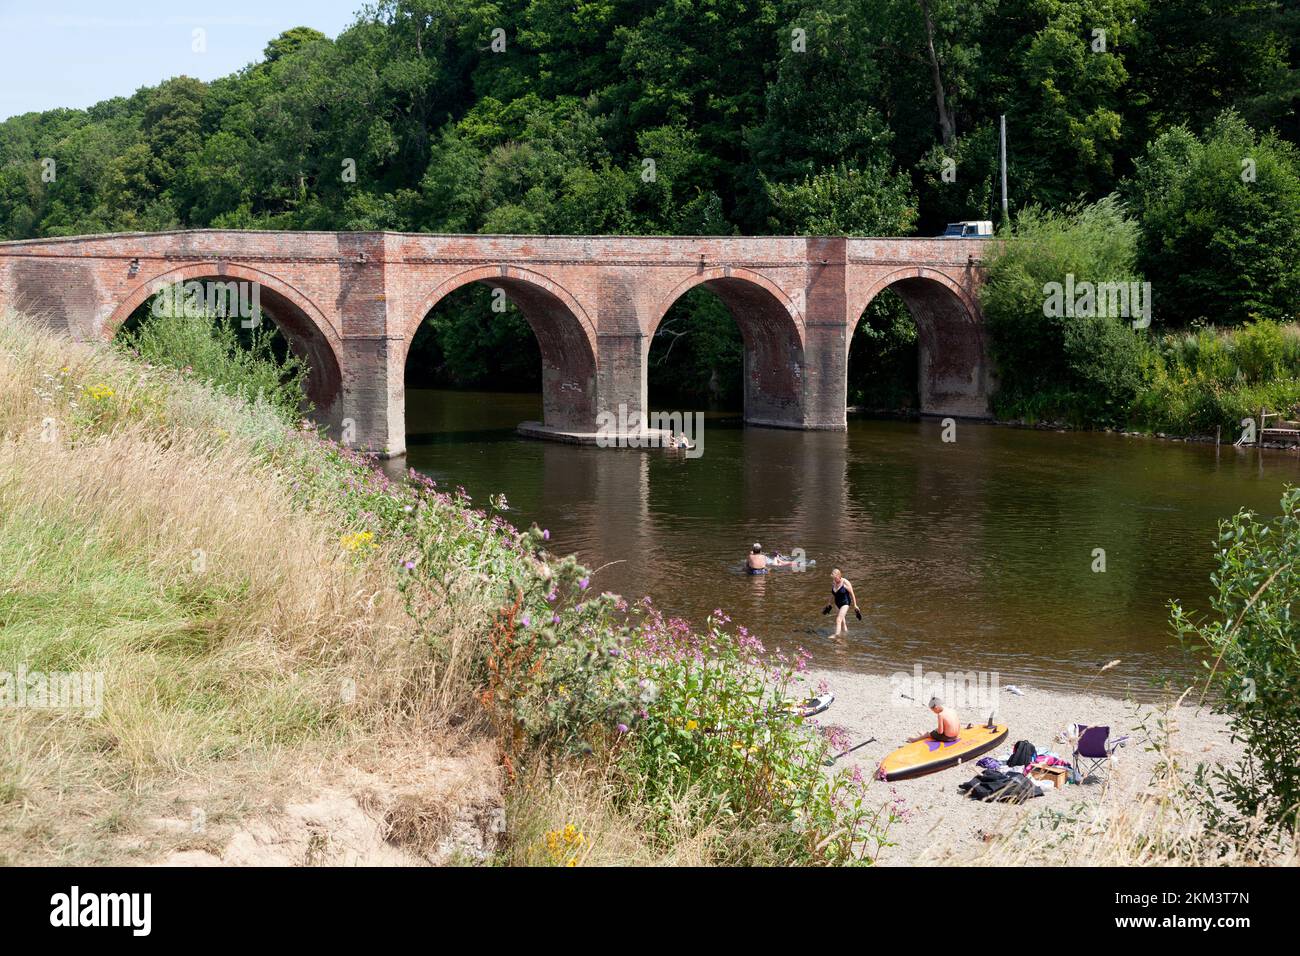 Bridge over the River Wye with people enjoying the hottest day on record, Bredwardine, Herefordshire Stock Photo